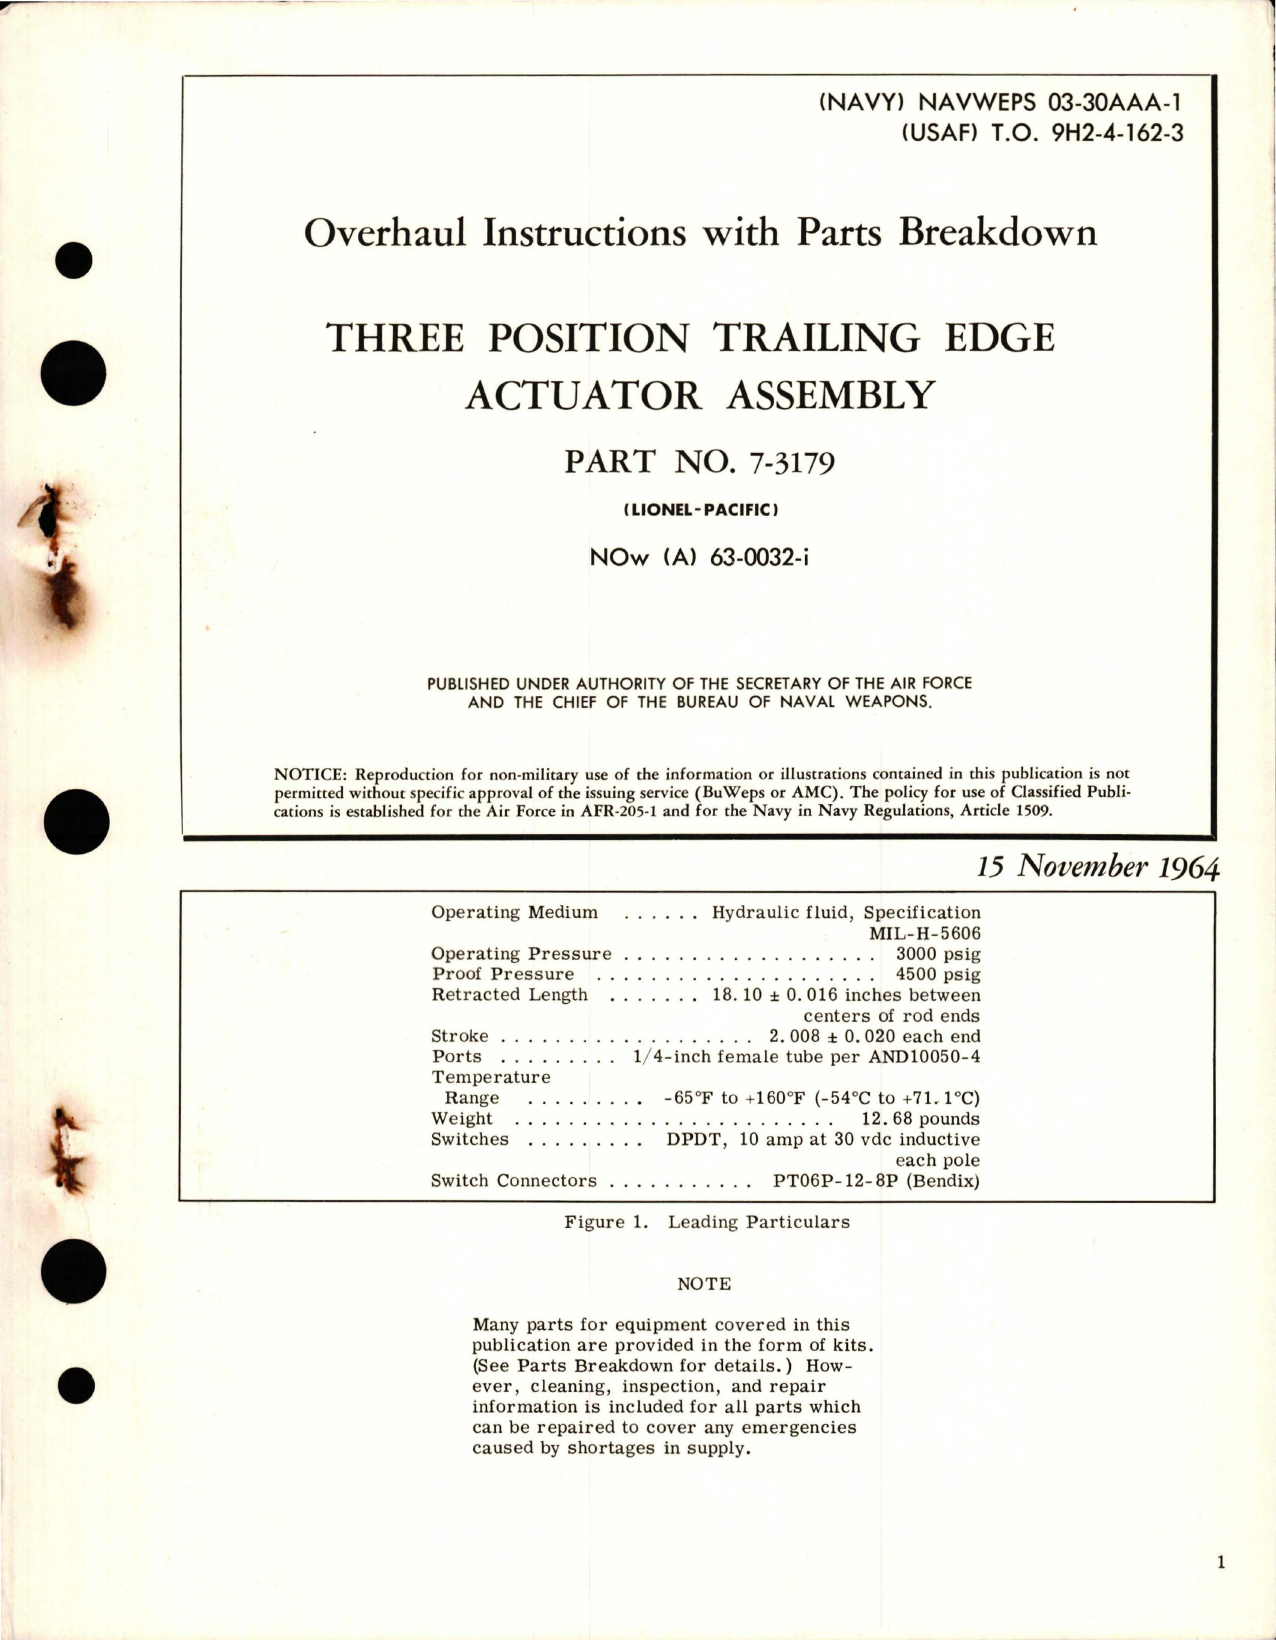 Sample page 1 from AirCorps Library document: Overhaul Instructions with Parts Breakdown for Three Position Trailing Edge Actuator Assembly - Part 7-3179